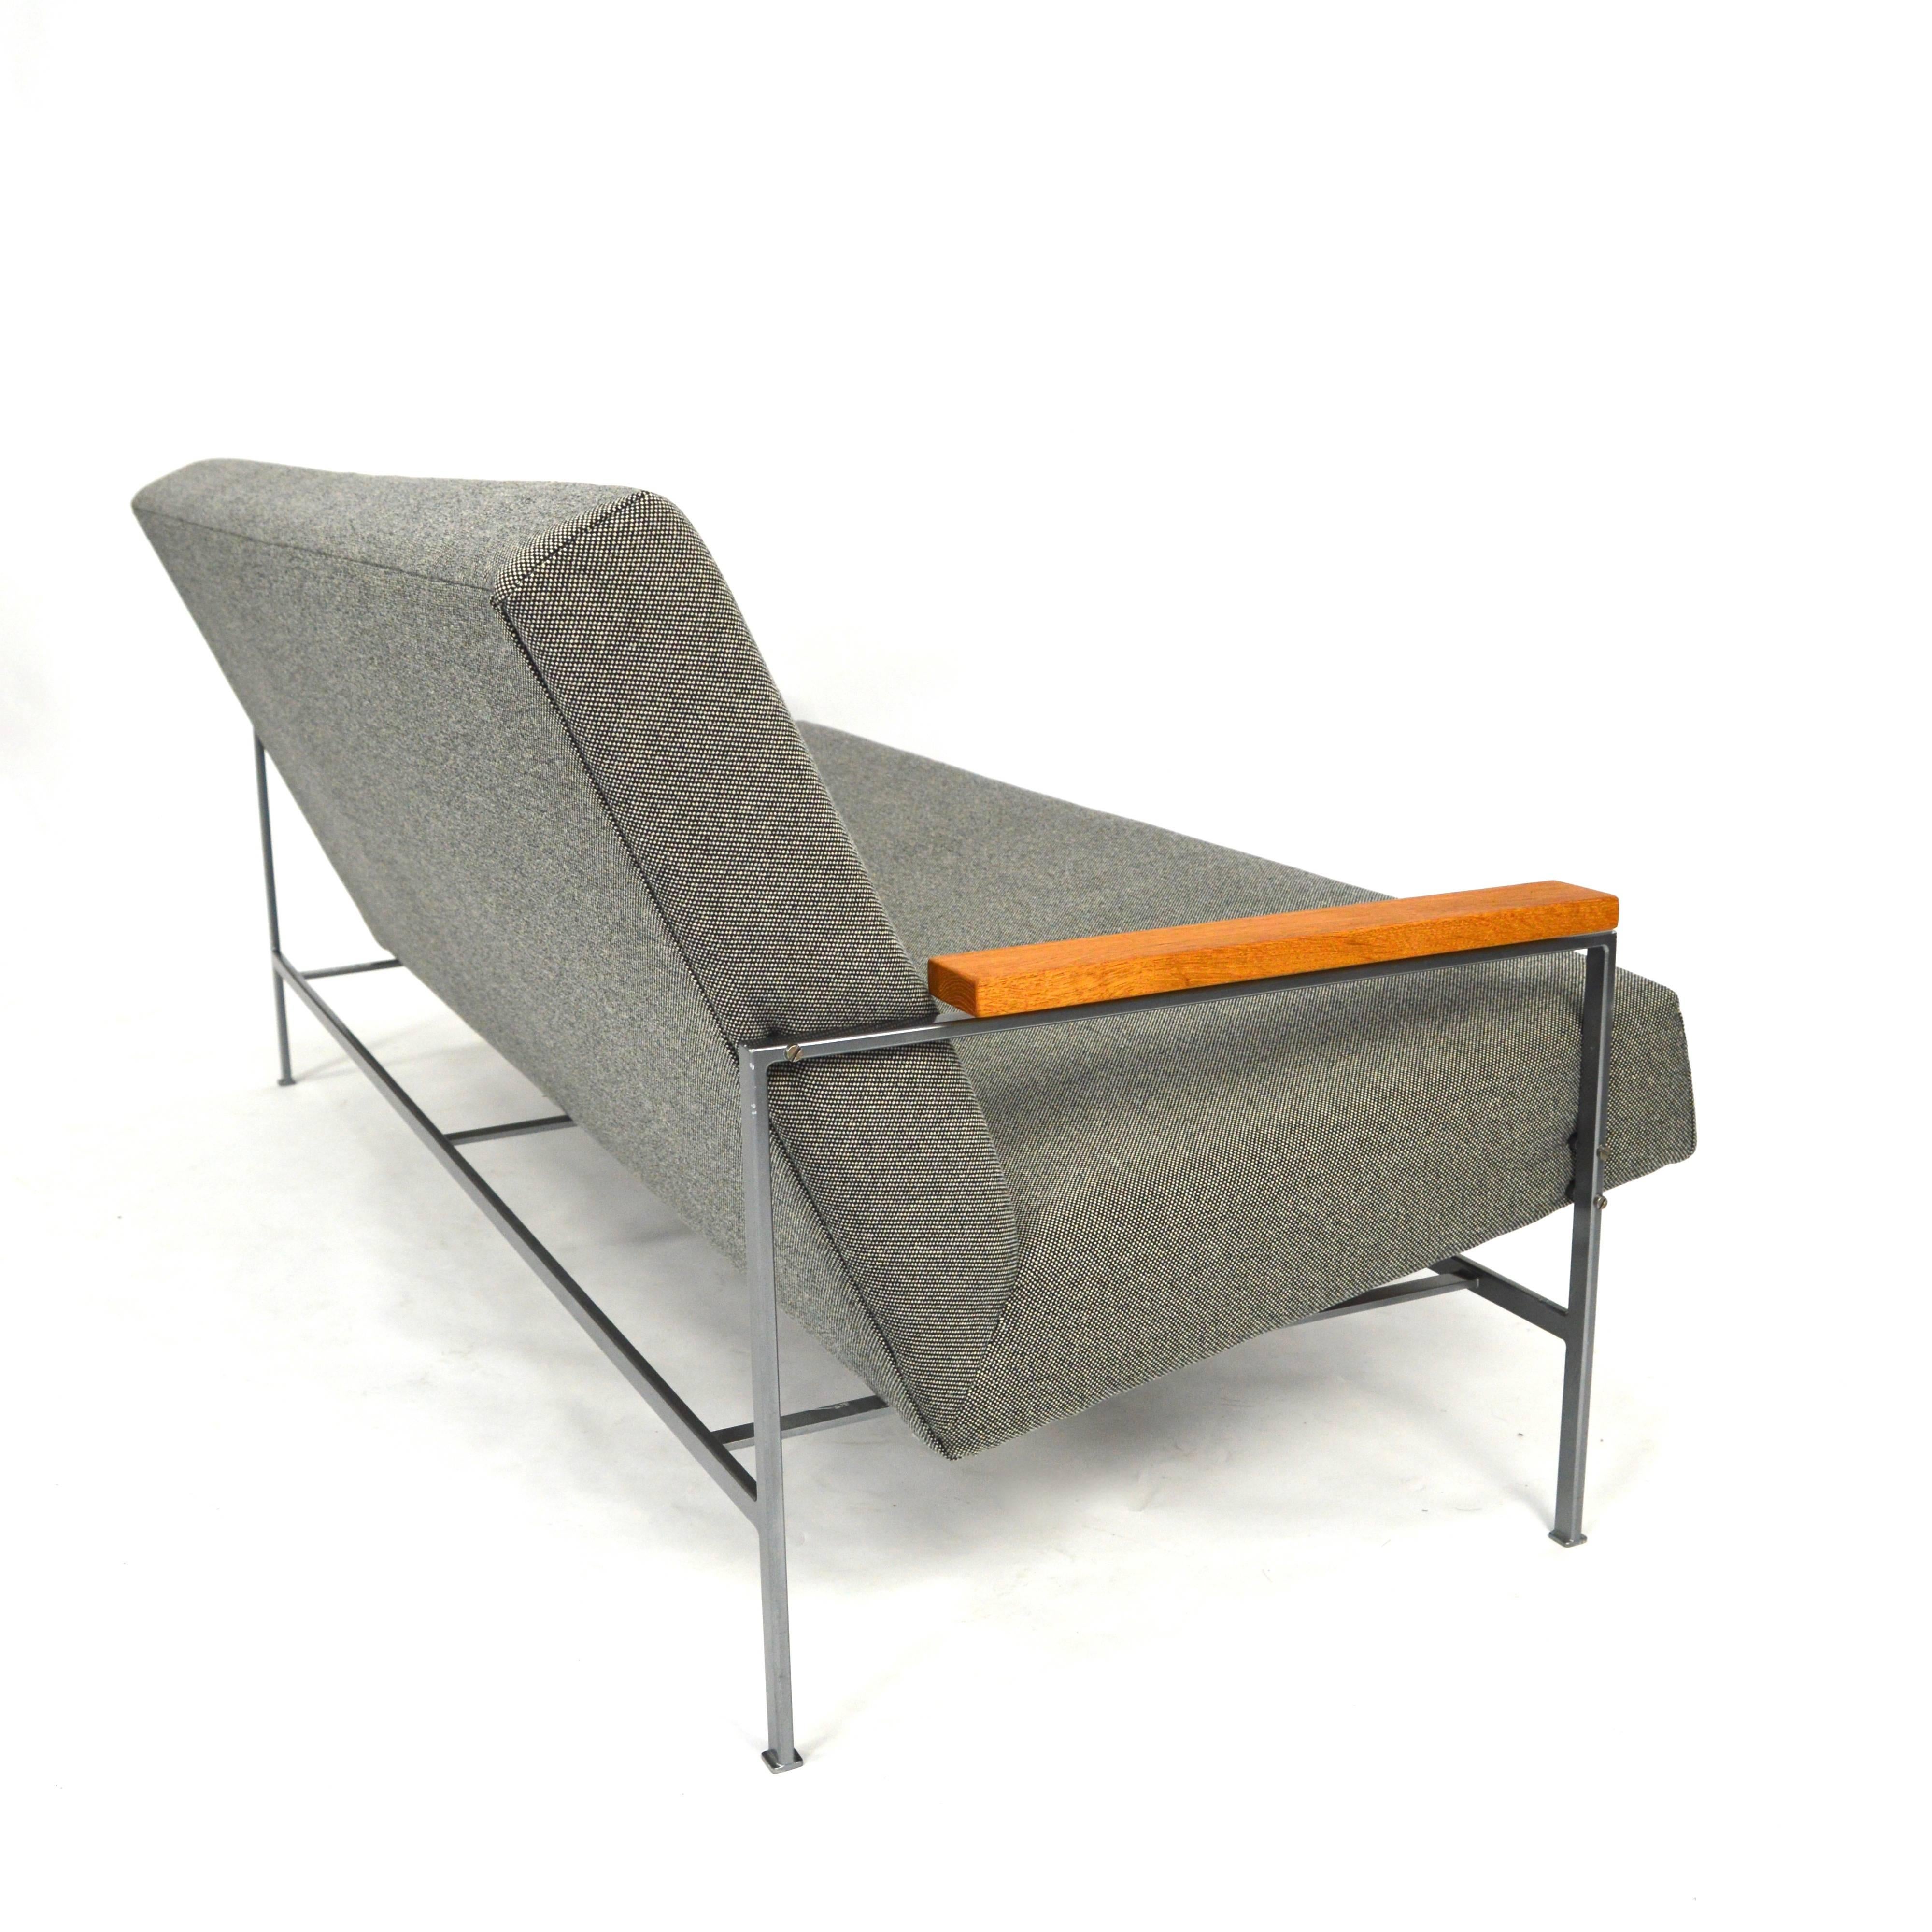 Mid-20th Century Reupholstered Sofa by Rob Parry for Gelderland, 1950s